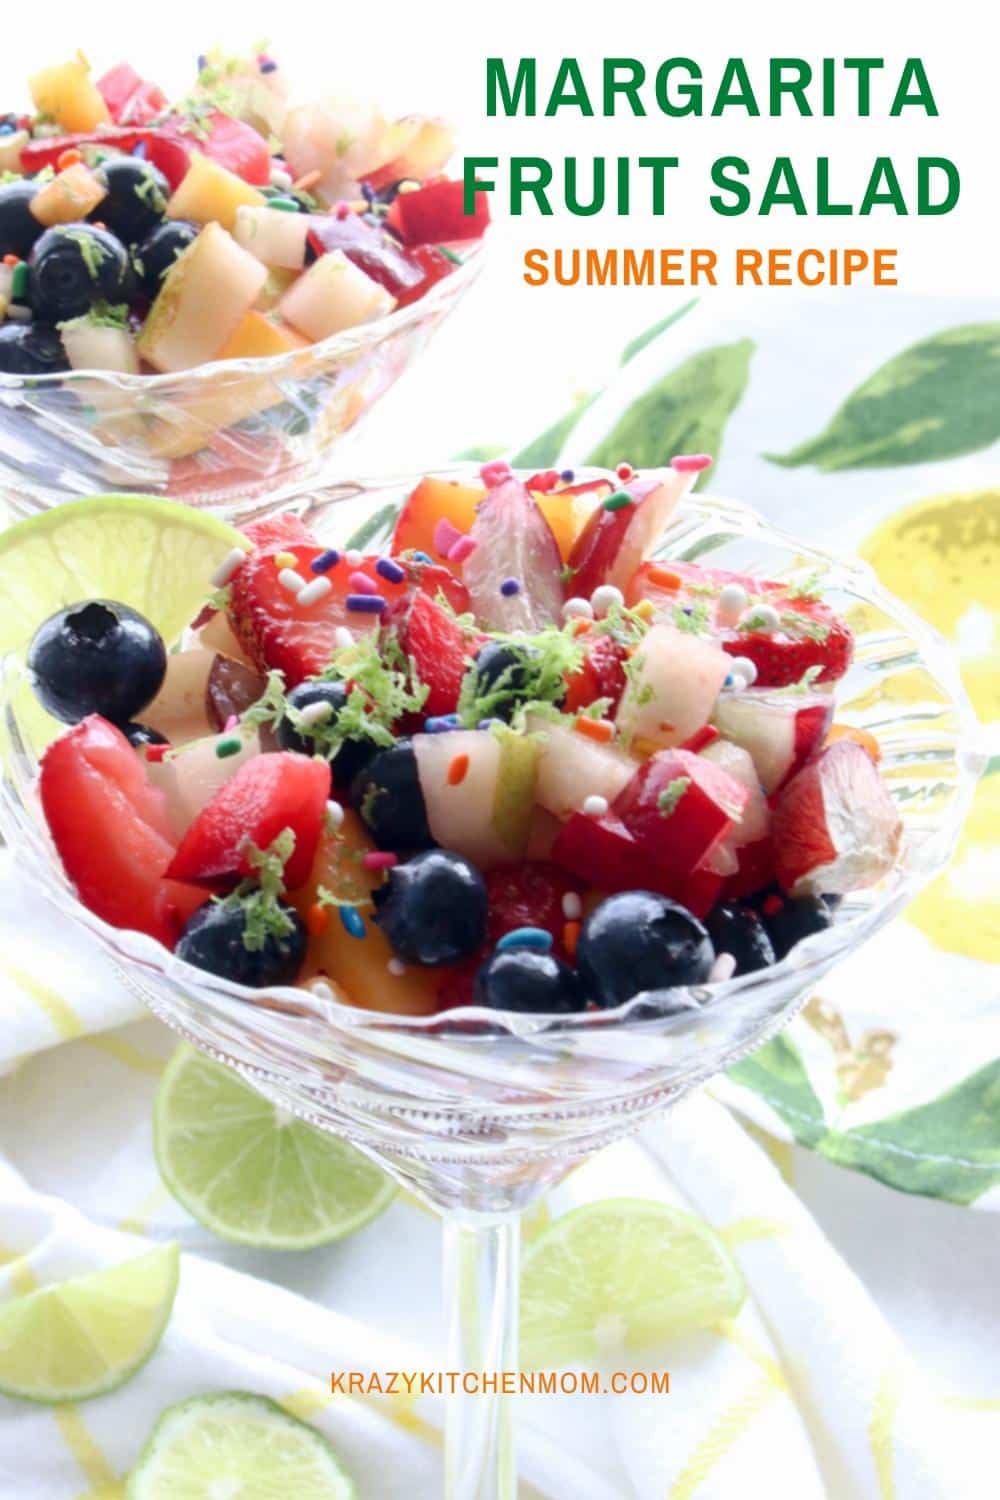 Impress your guests with this elevated adult fruit salad loaded with seasonal fresh fruit and tossed in a light tequila-based dressing. via @krazykitchenmom